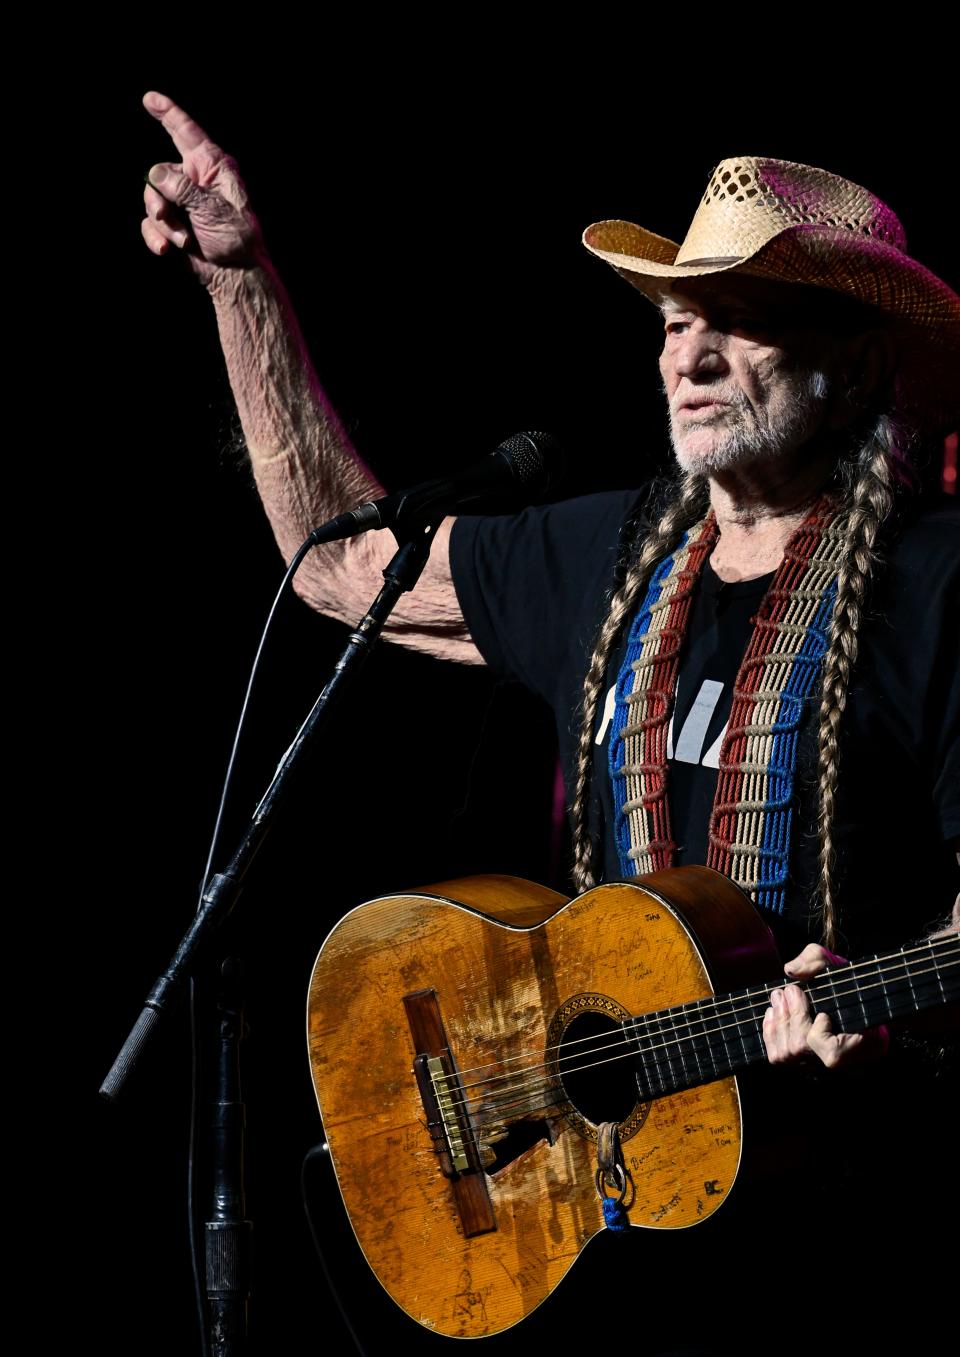 Willie Nelson, pictured here performing at Sarasota's Van Wezel Performing Arts Hall on Oct. 17, 2017, will play The Sound on Feb. 10.